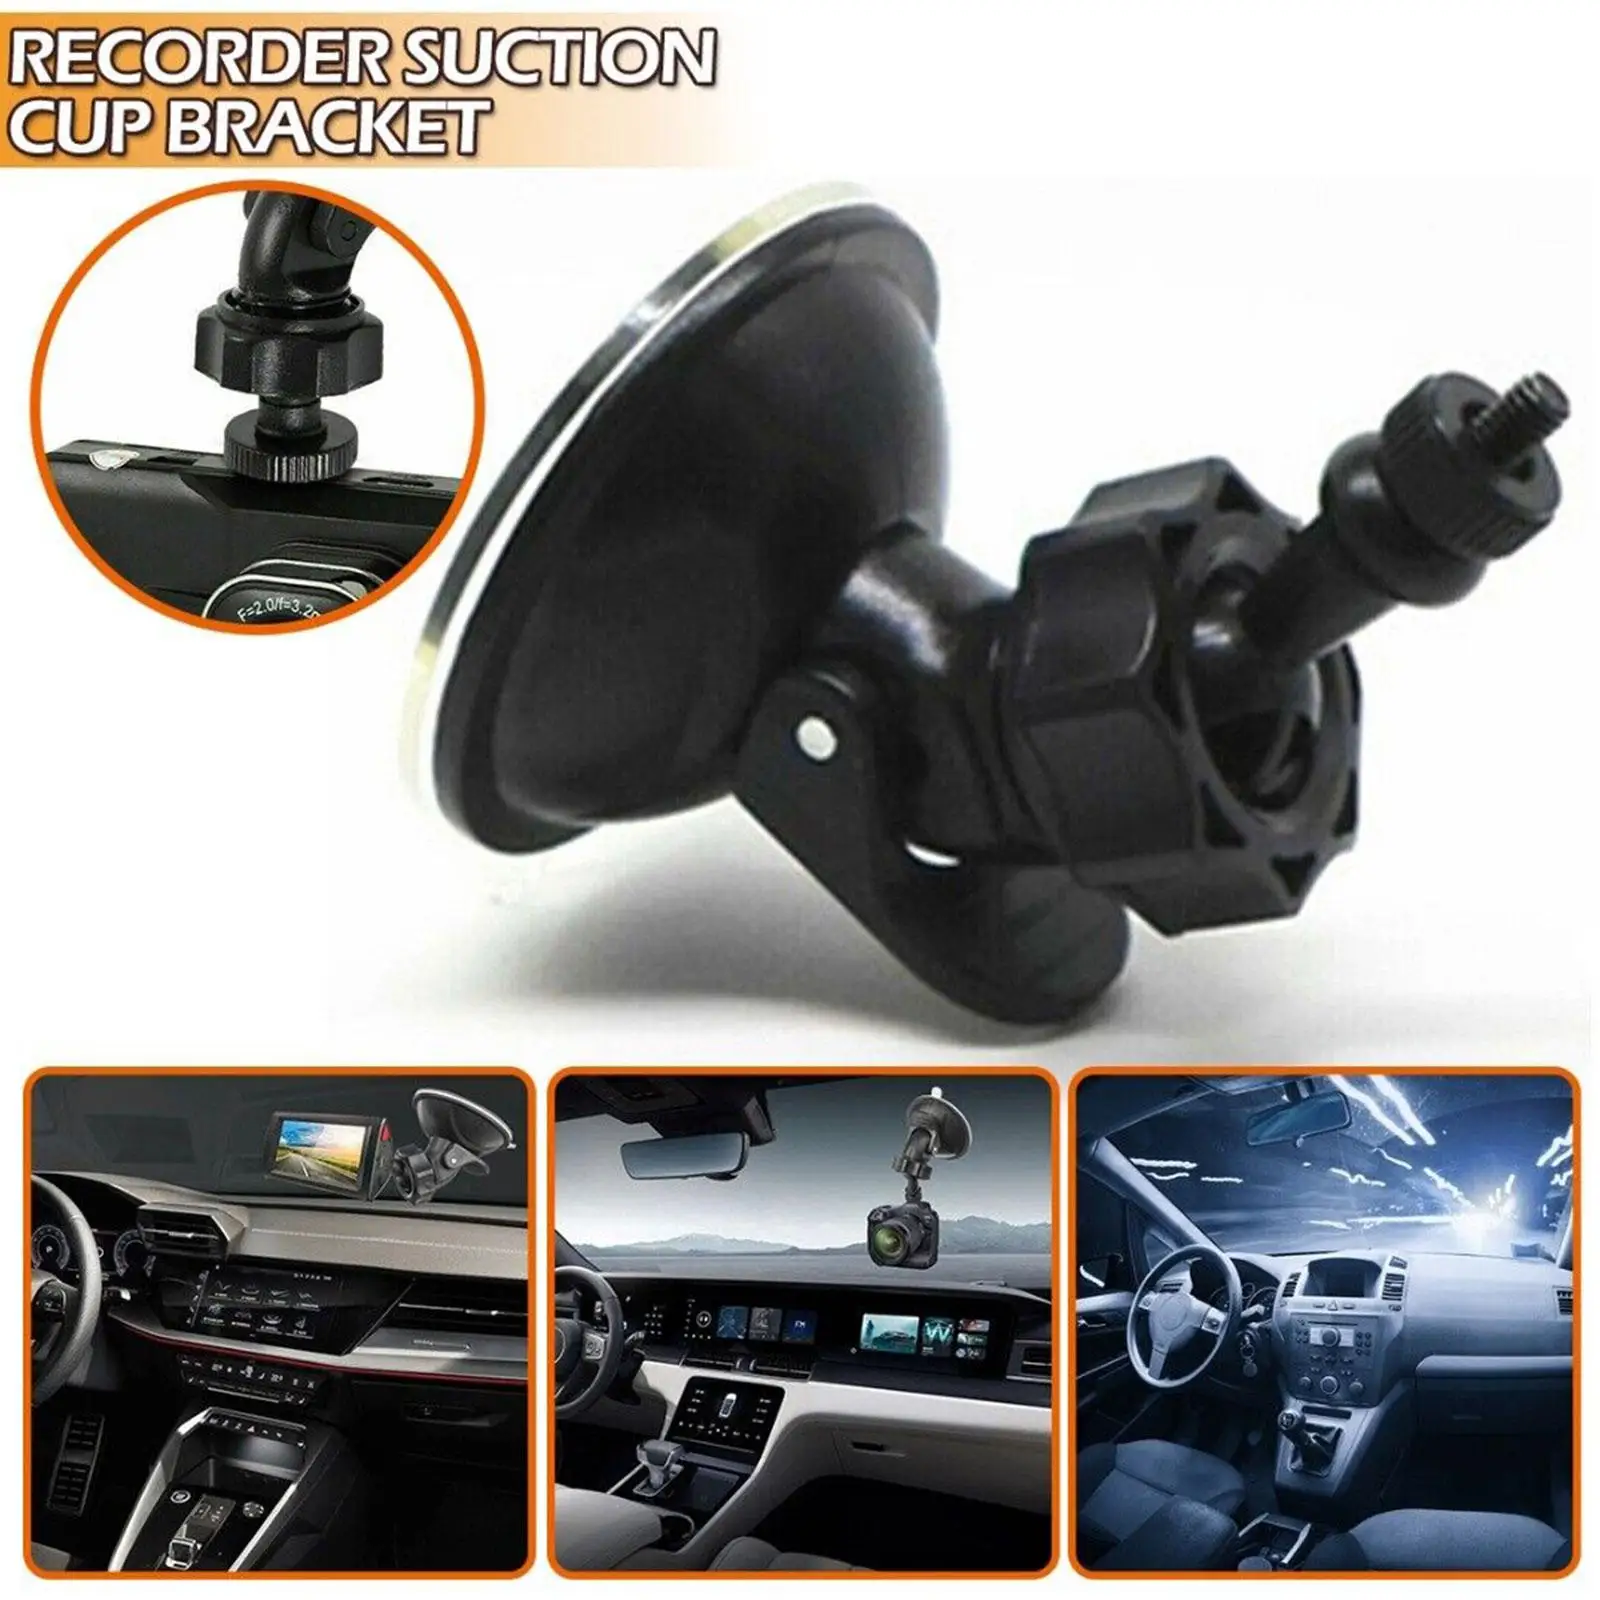 

Driving Recorder Suction Cup Bracket 360° Rotation For Dash Cam Camera DVR Mount Holder Travel Easy Installation Car Access M6J4